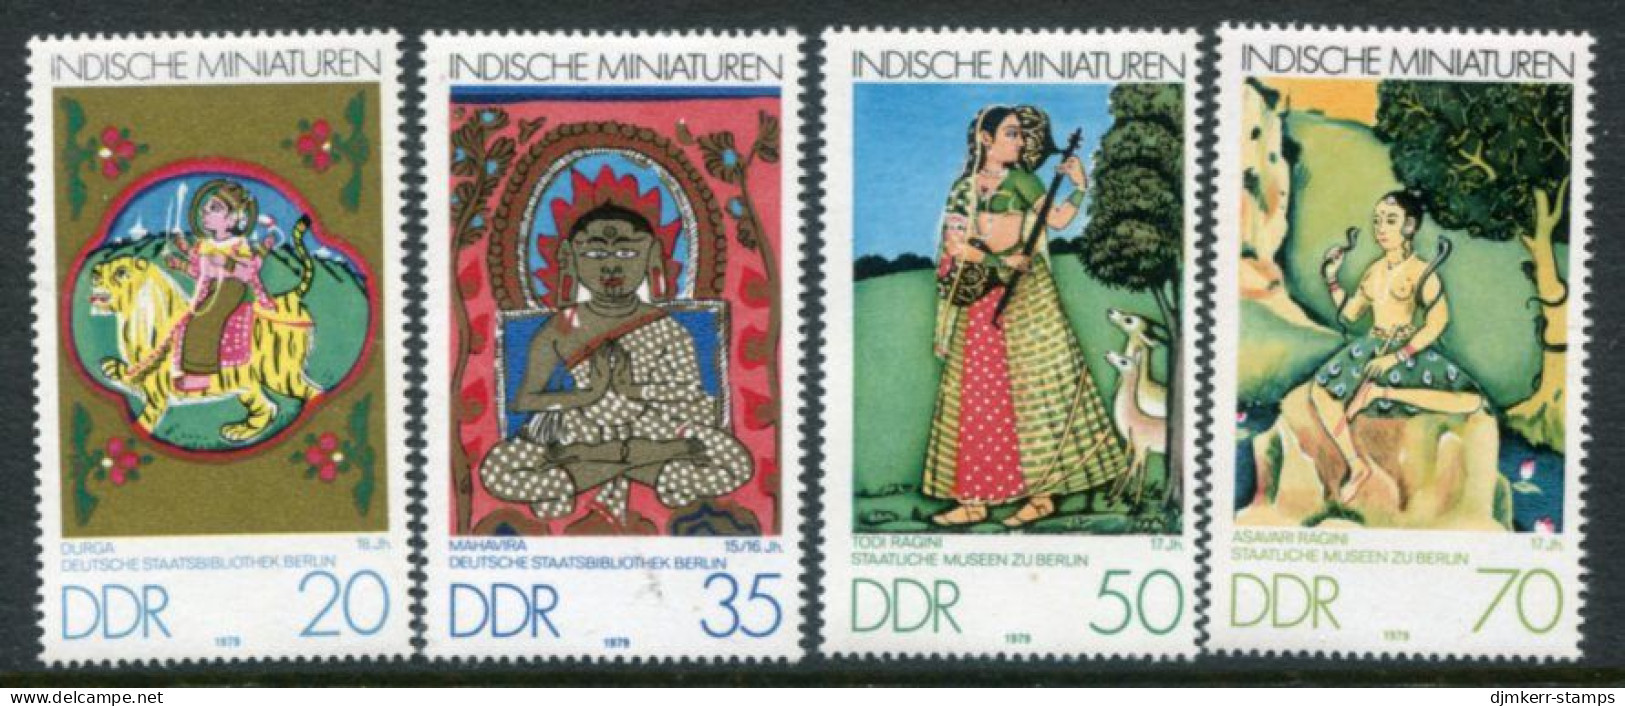 DDR / E. GERMANY 1979 Indian Miniatures MNH / **.  Michel  2418-21 - Neufs